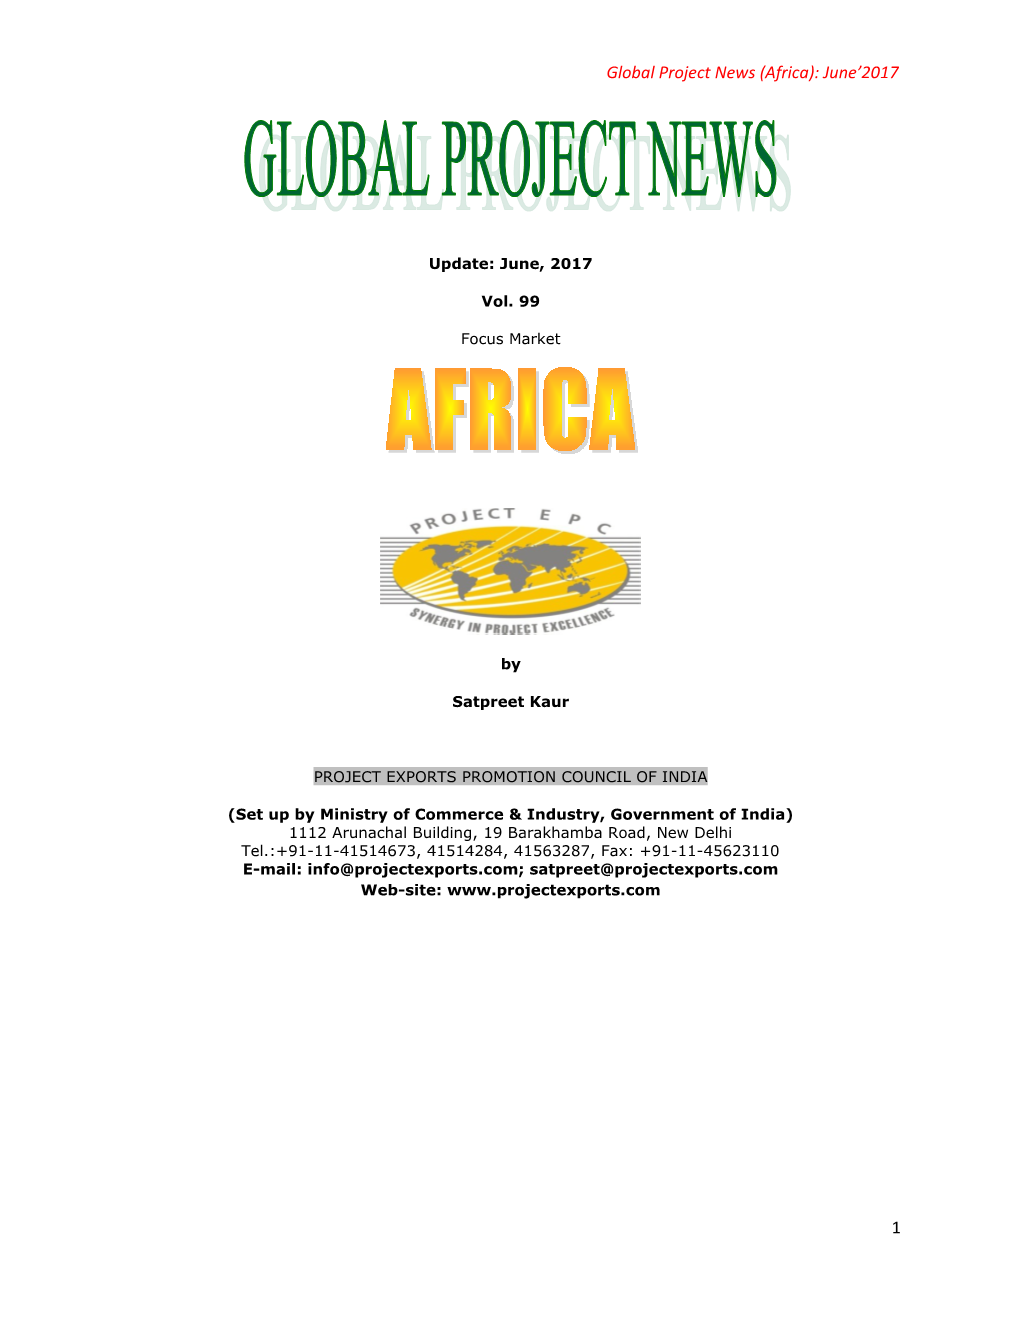 Global Project News (Africa): June 2017